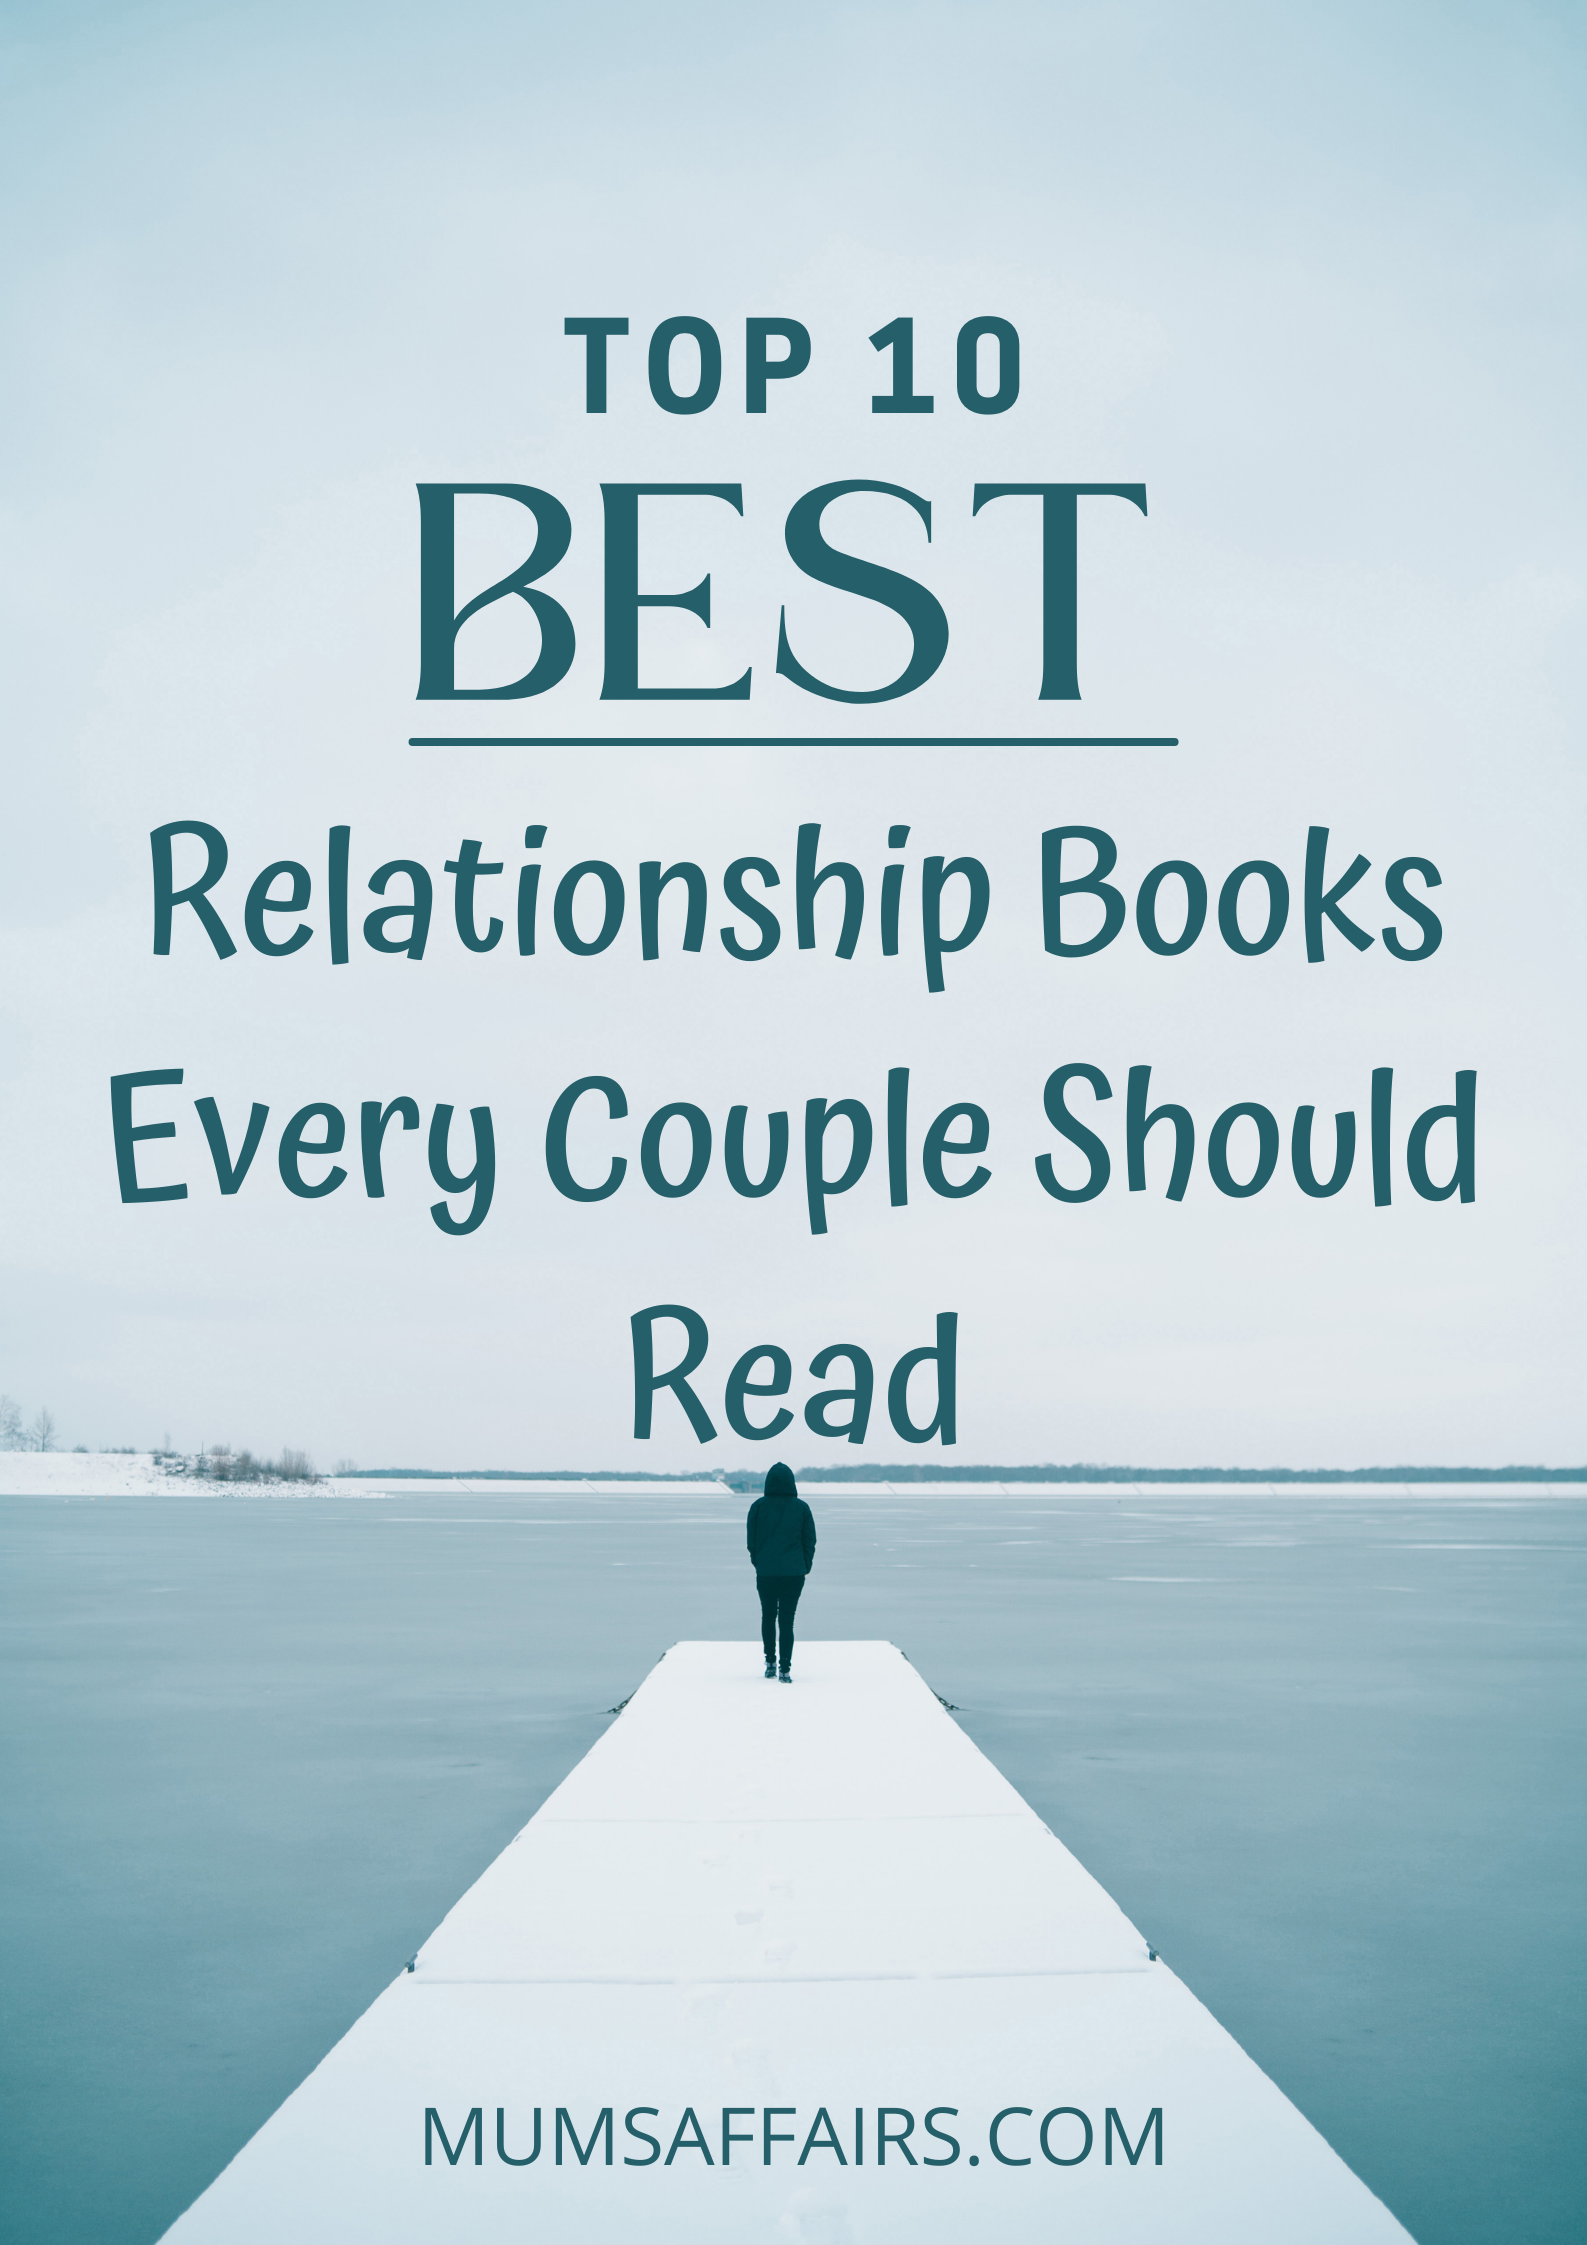 Books Every Couple Should Read